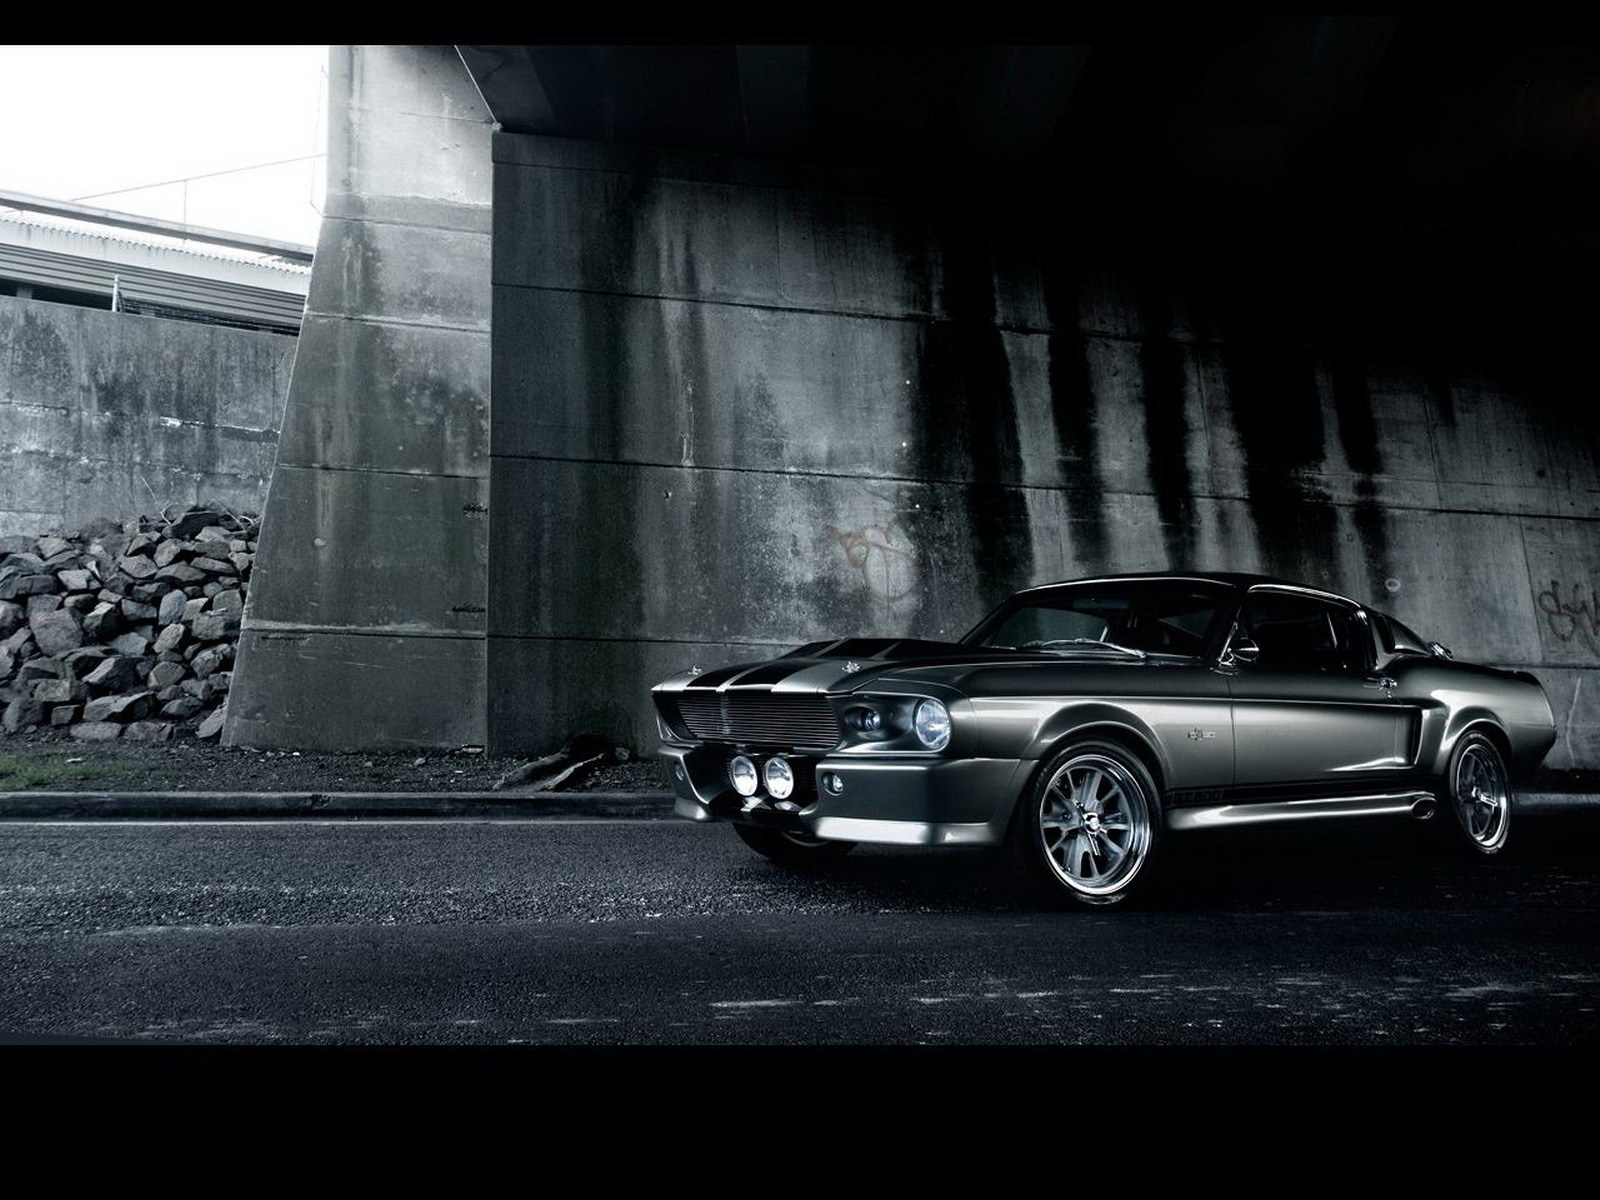 mustang, transport, art photo, auto, ford, black 2160p